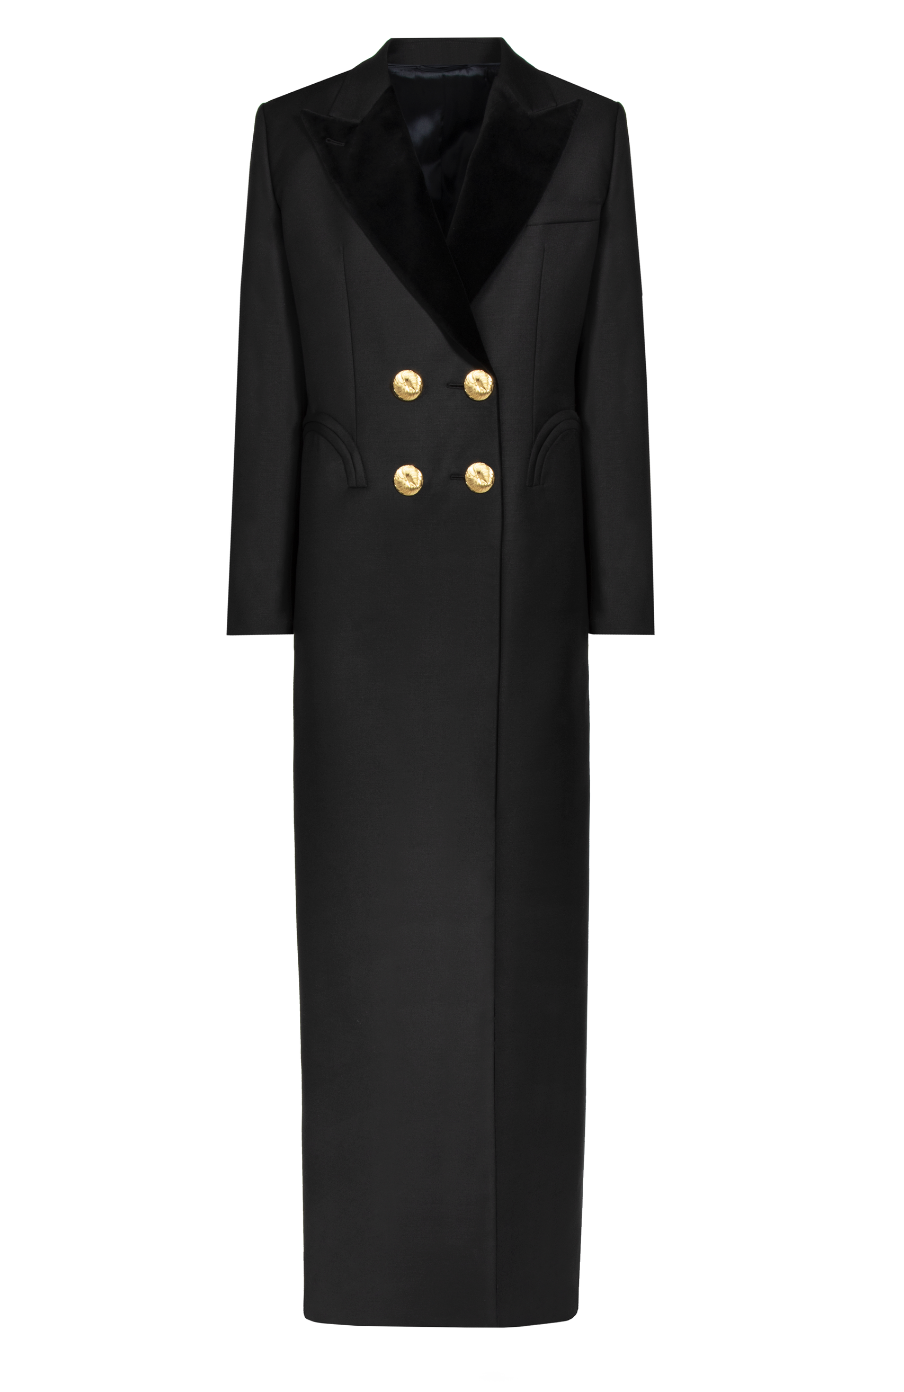 a black jacket with gold buttons